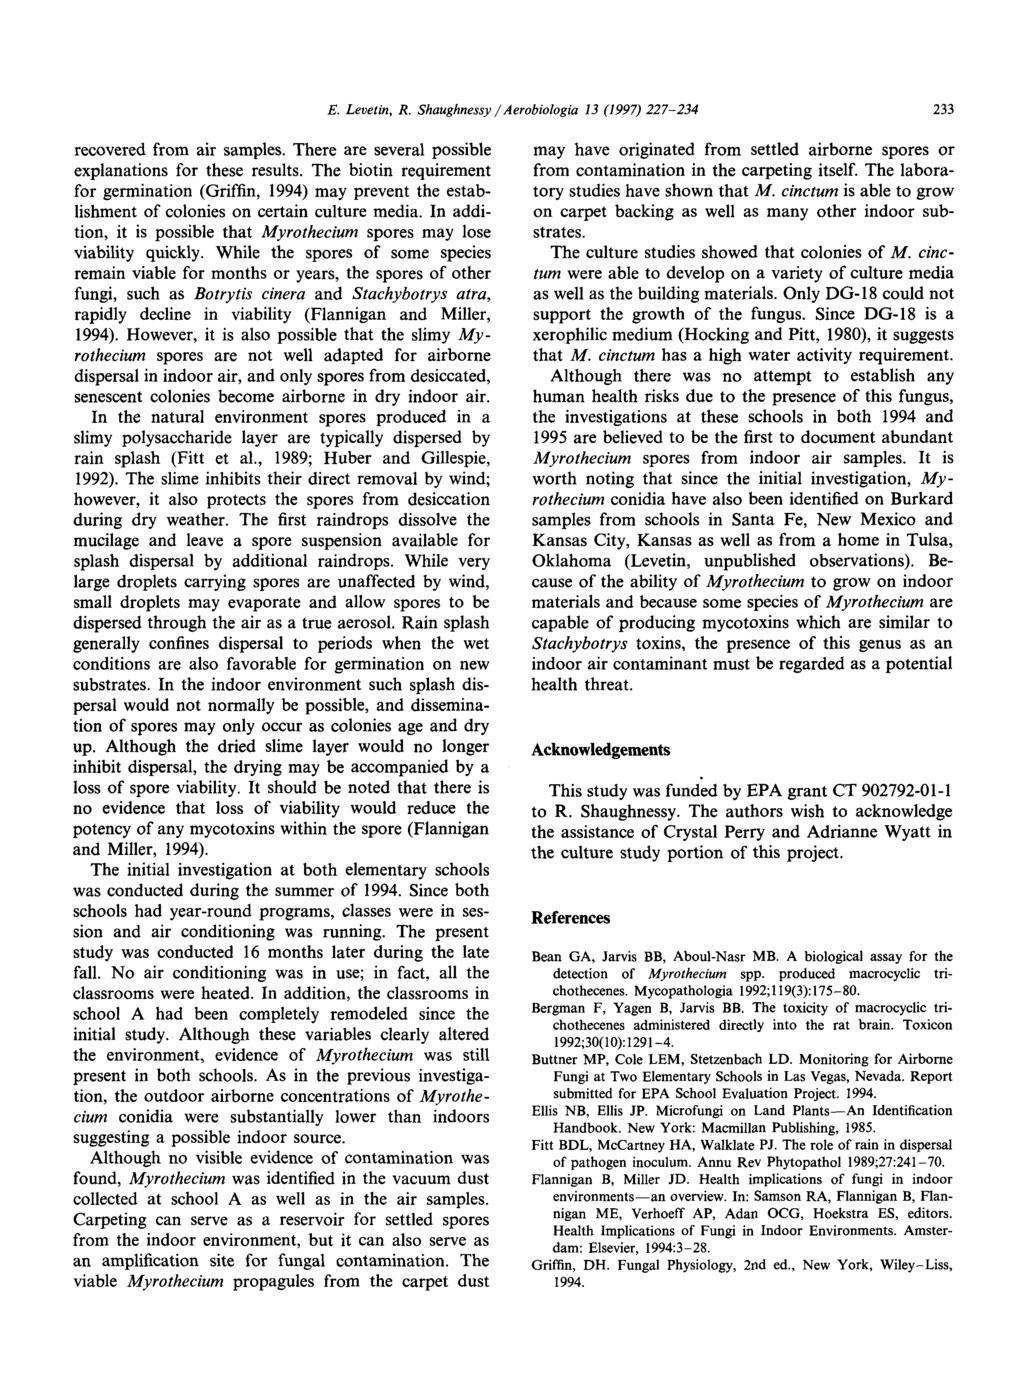 E. Levetin, R. Shaughnessy /Aerobiologia 13 (1997) 227-234 233 recovered from air samples. There are several possible explanations for these results.